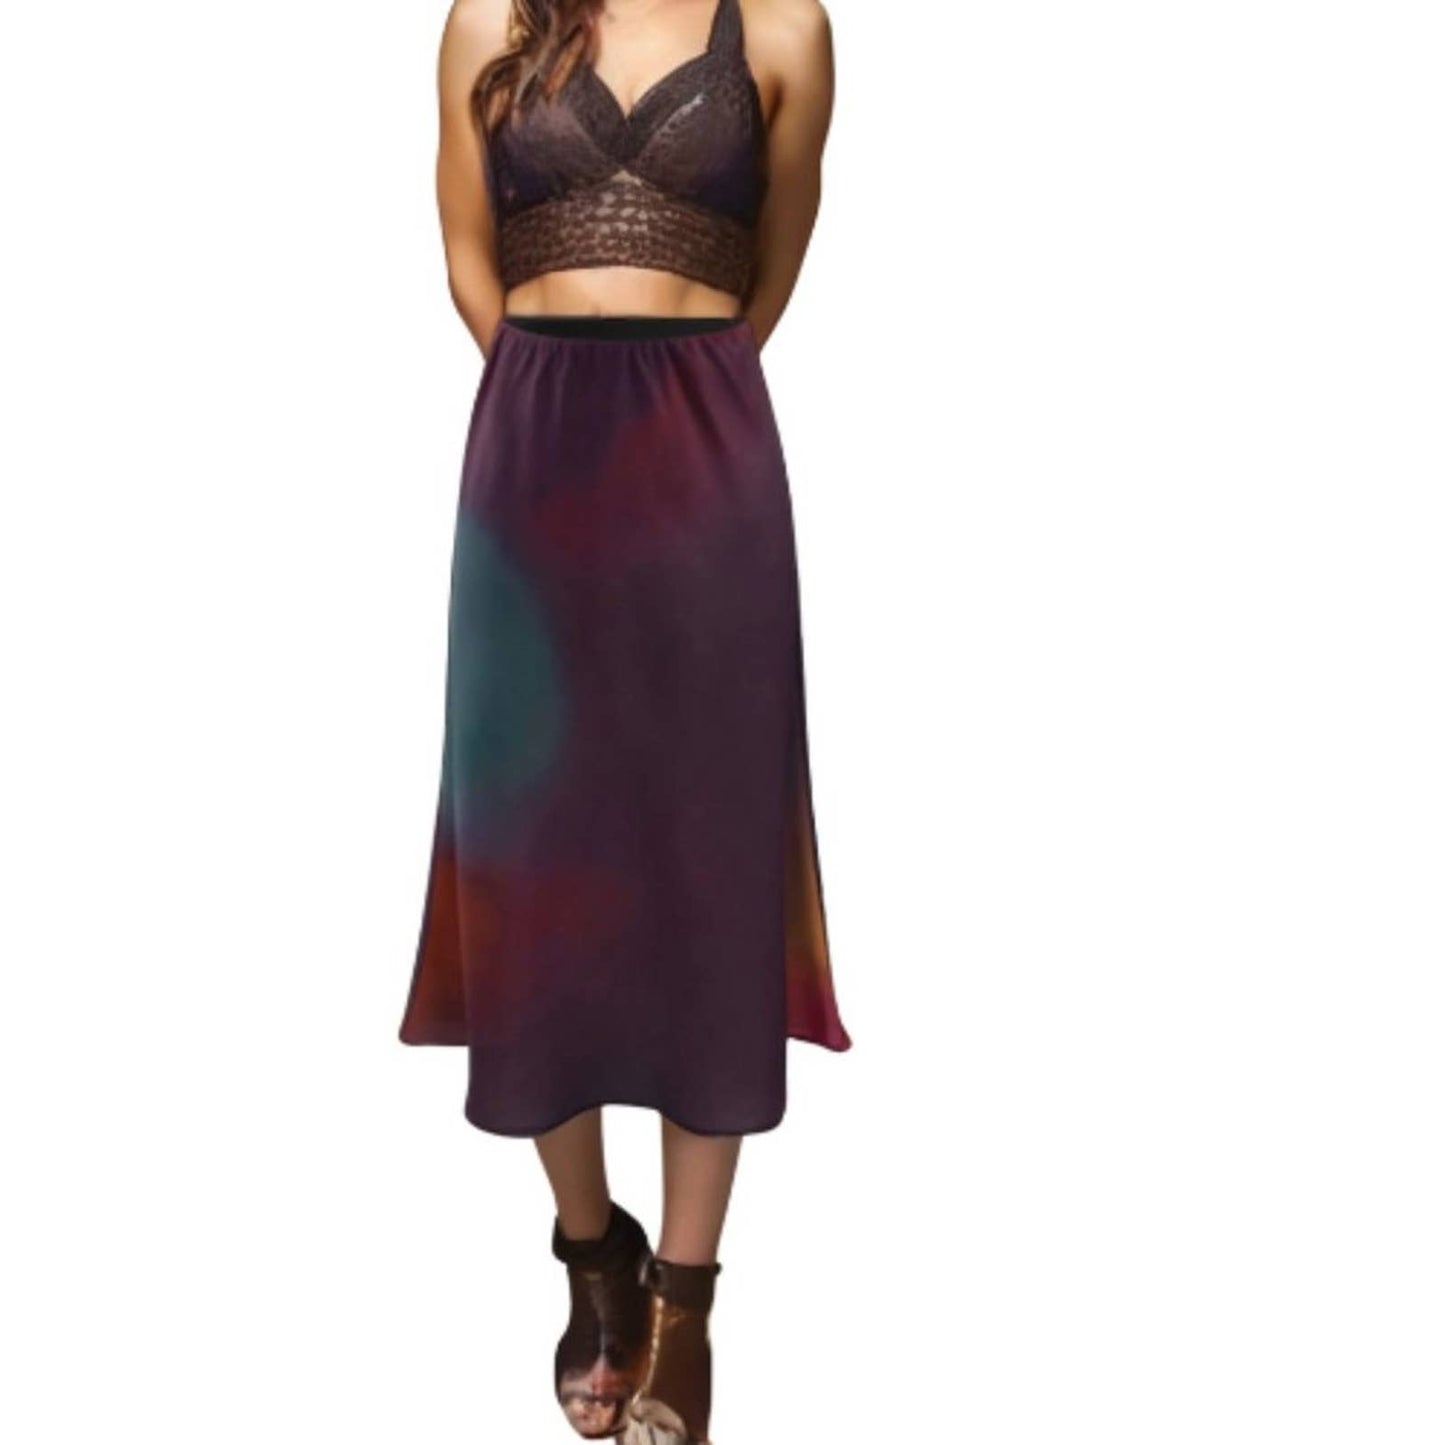 Mica's Boutique Ombre Skirt NWT Size Medium